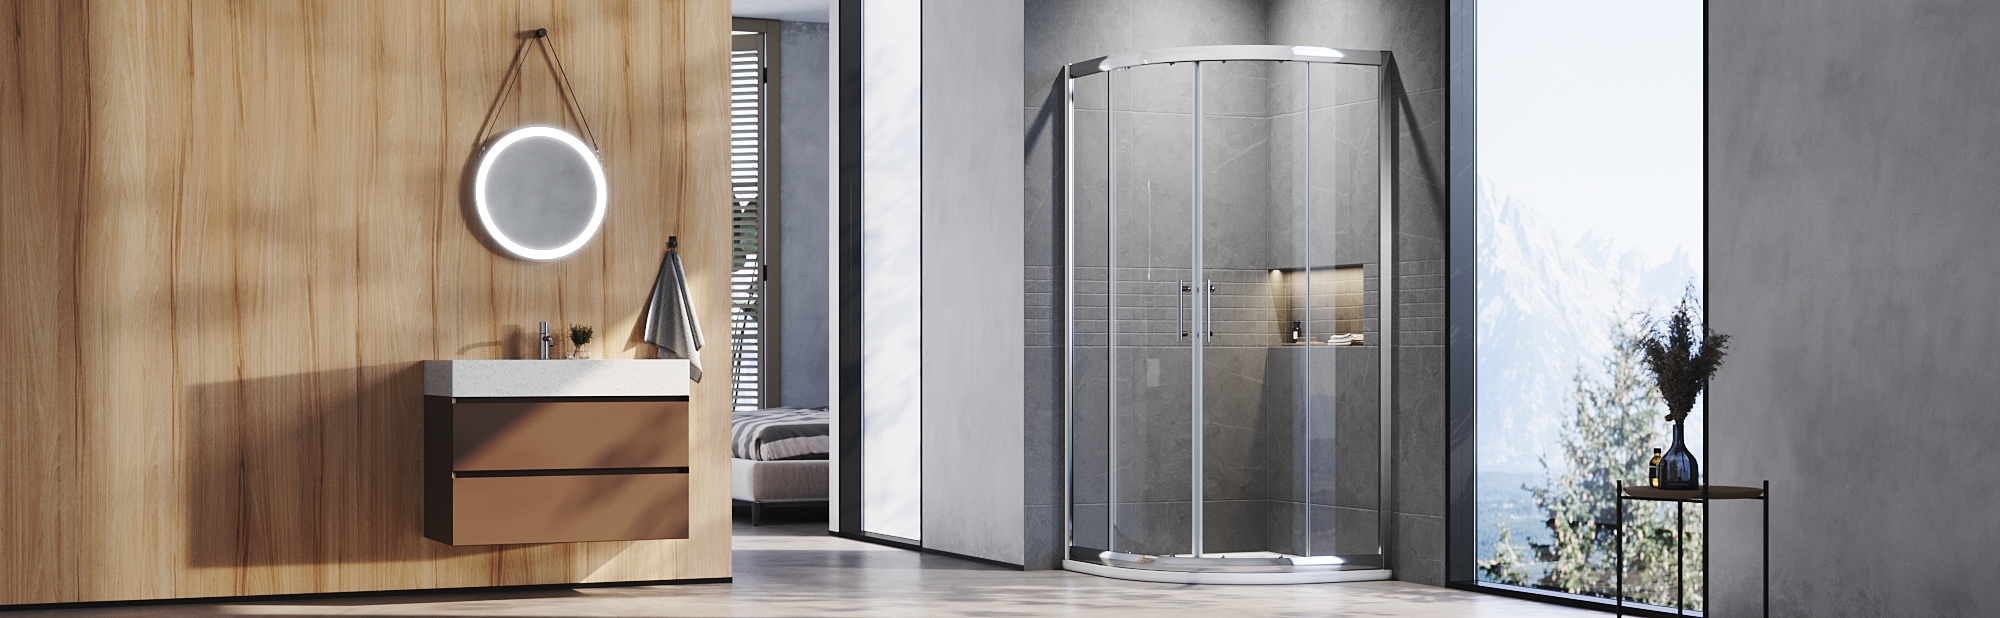 Elegant Showers Launches New Collection Of Shower Enclosures With Trays